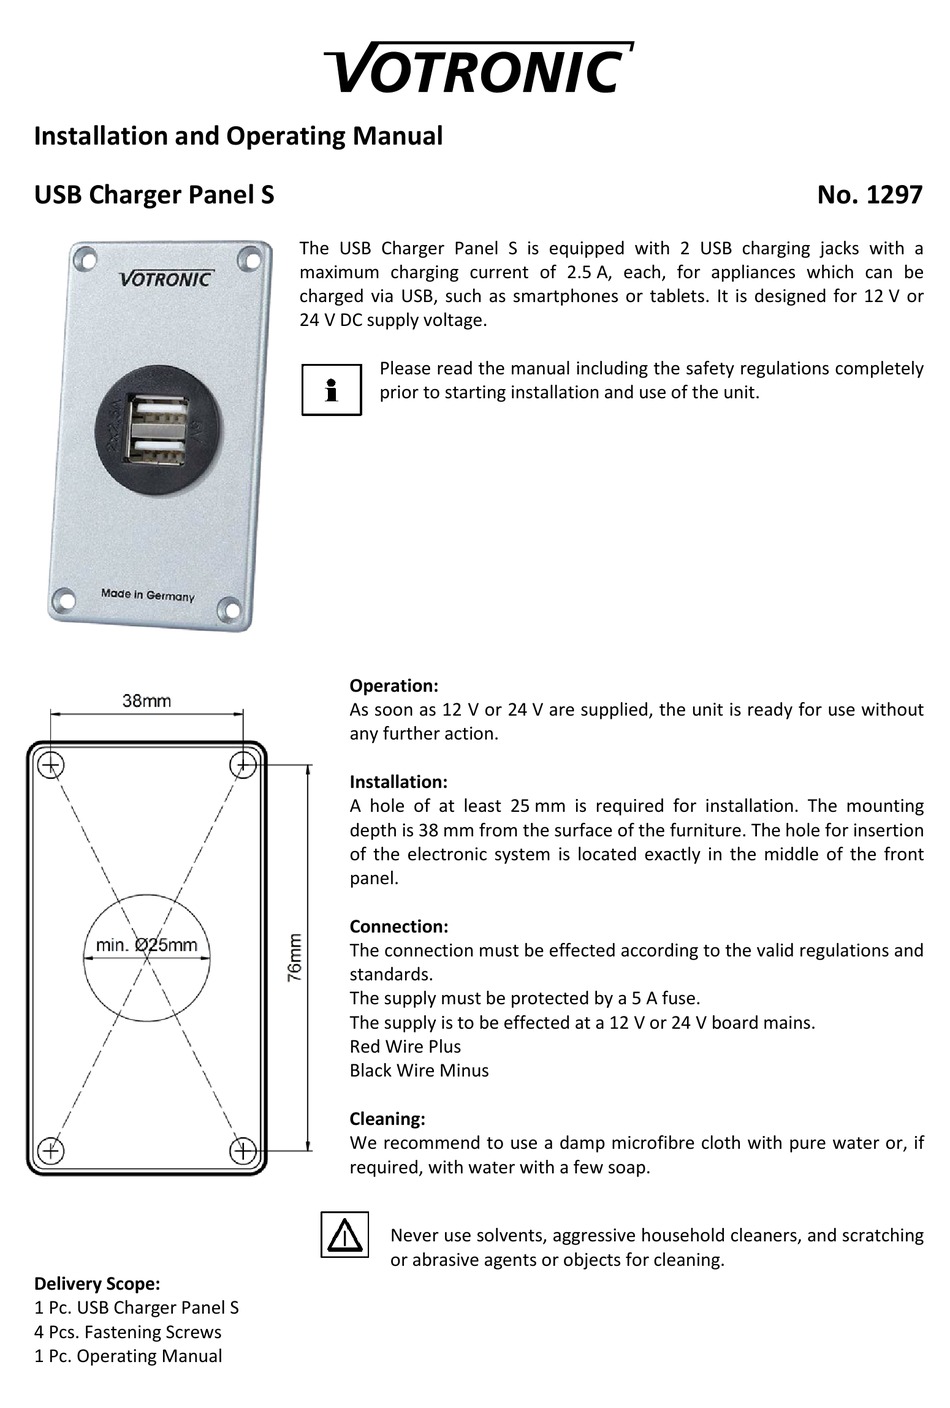 VOTRONIC USB CHARGER PANEL S INSTALLATION AND OPERATING MANUAL Pdf Download